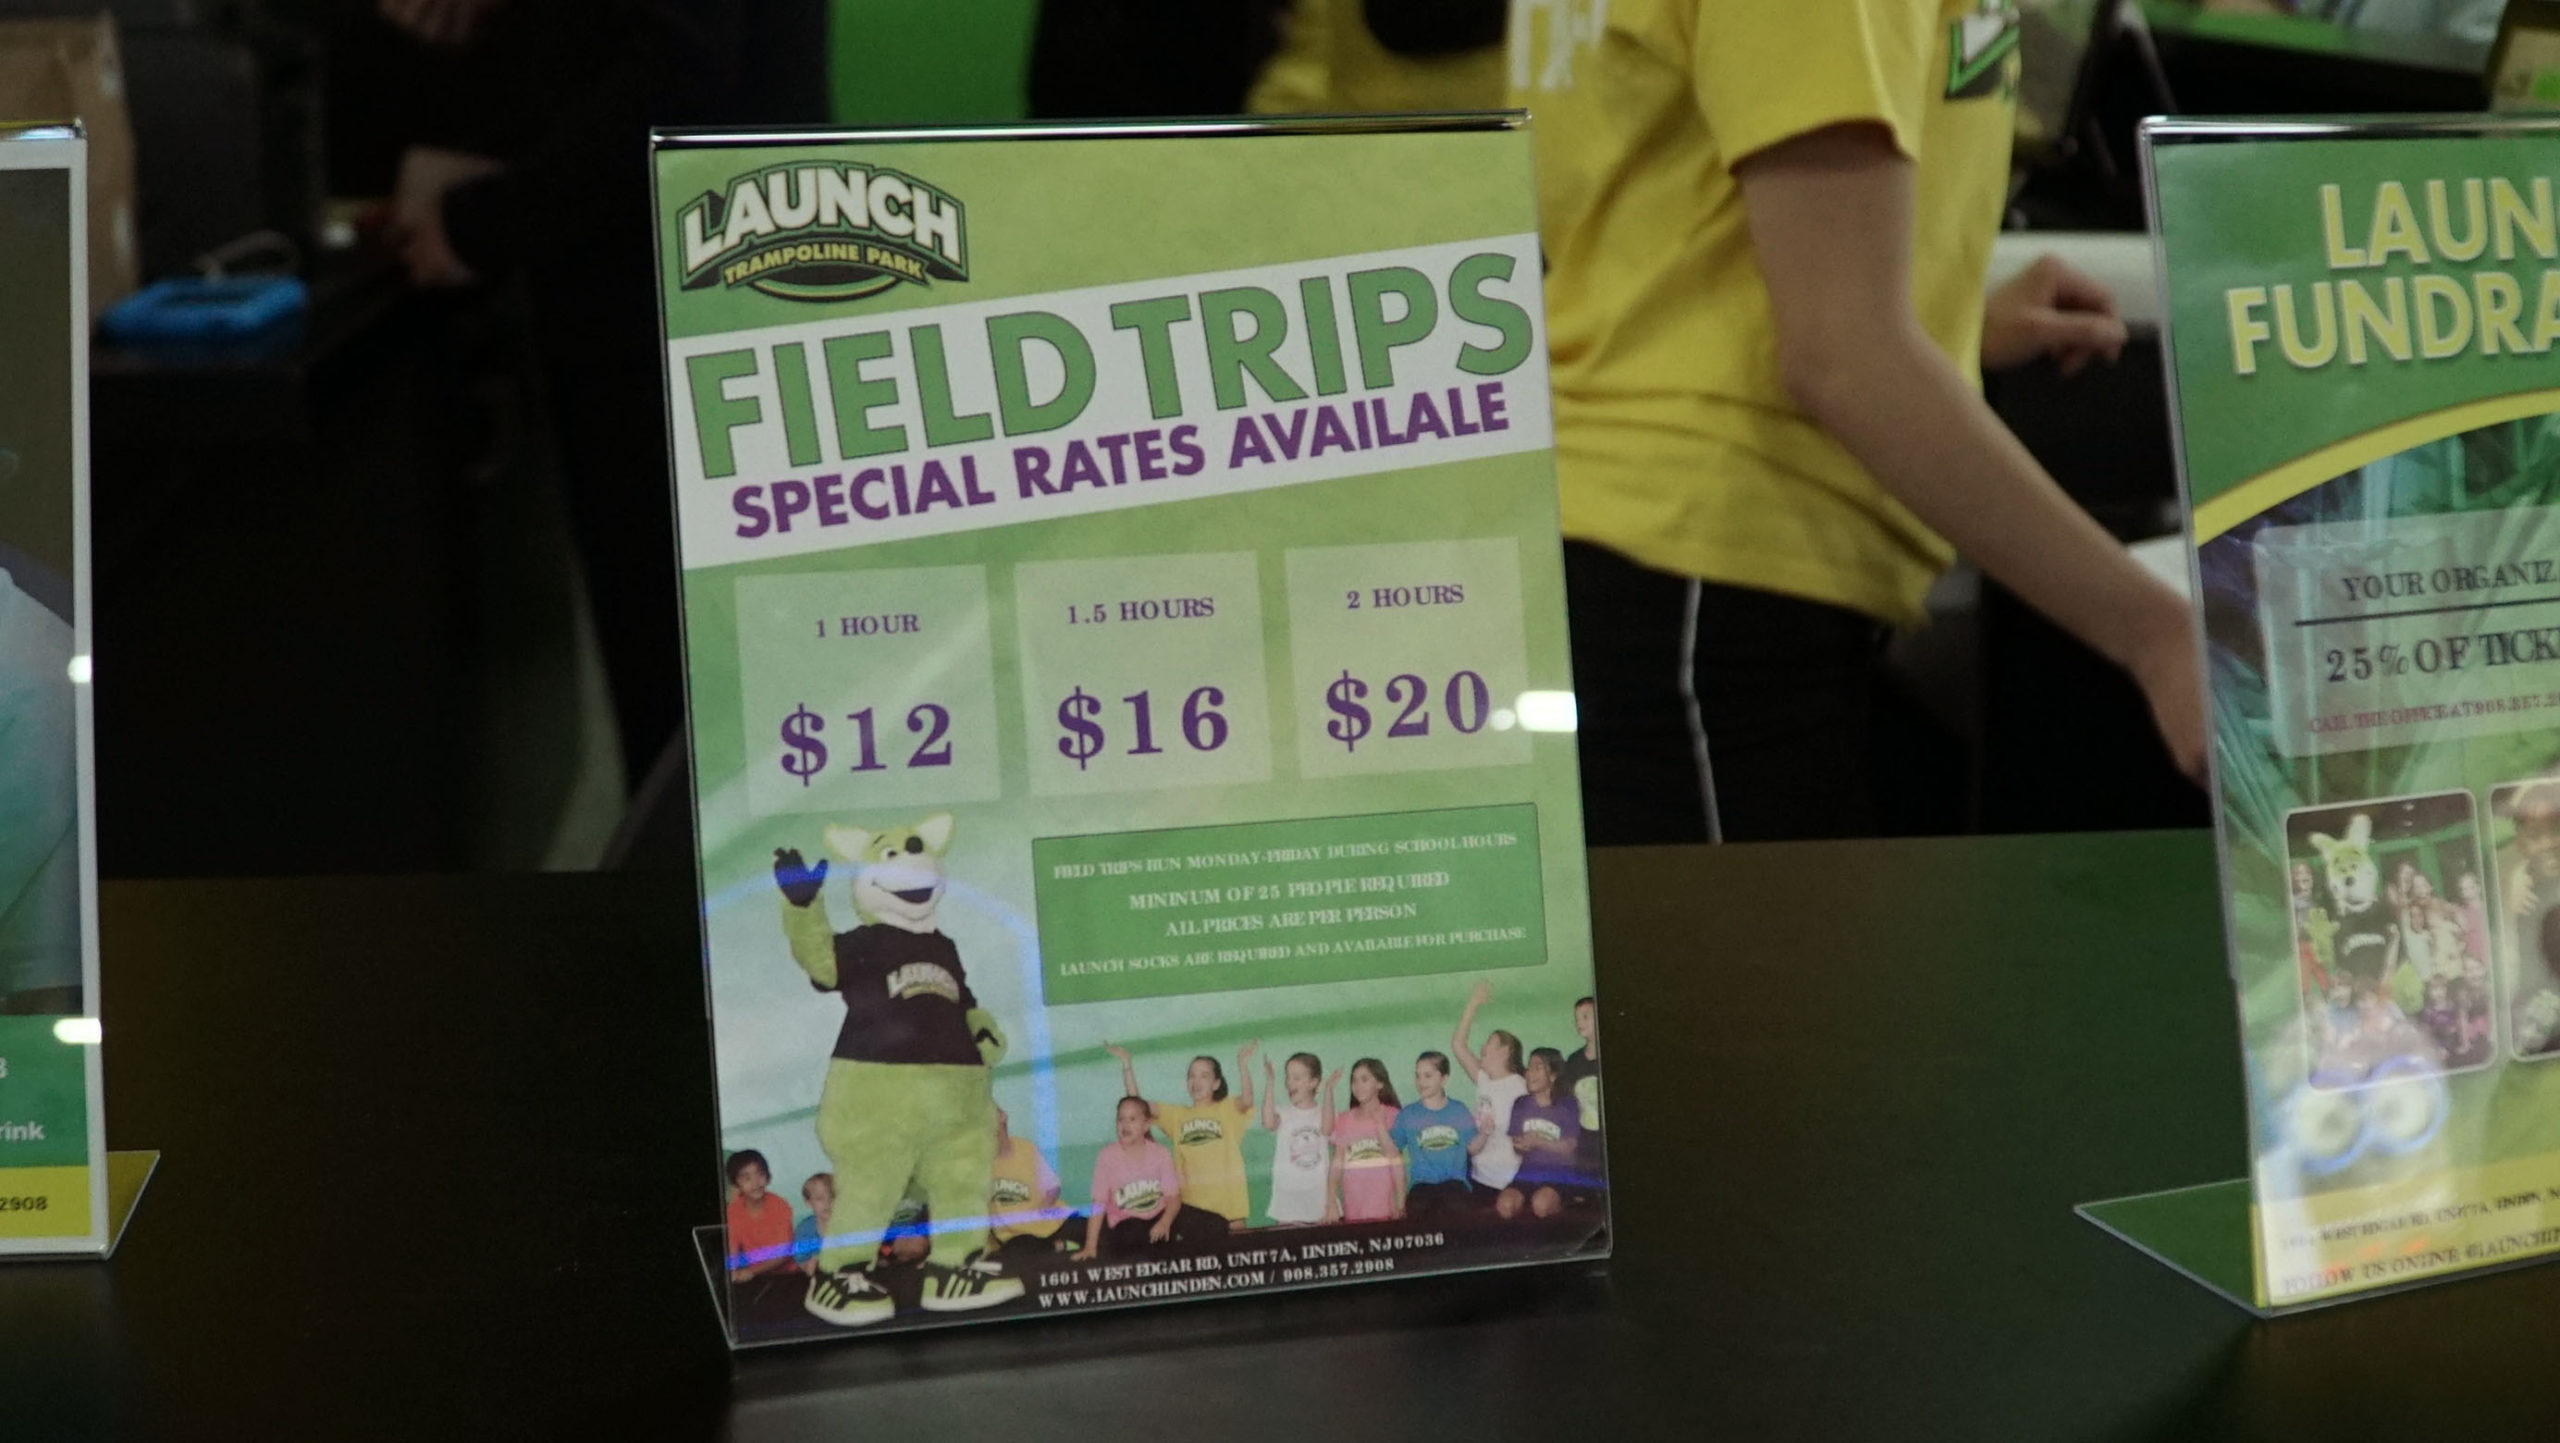 how much is launch trampoline park per person